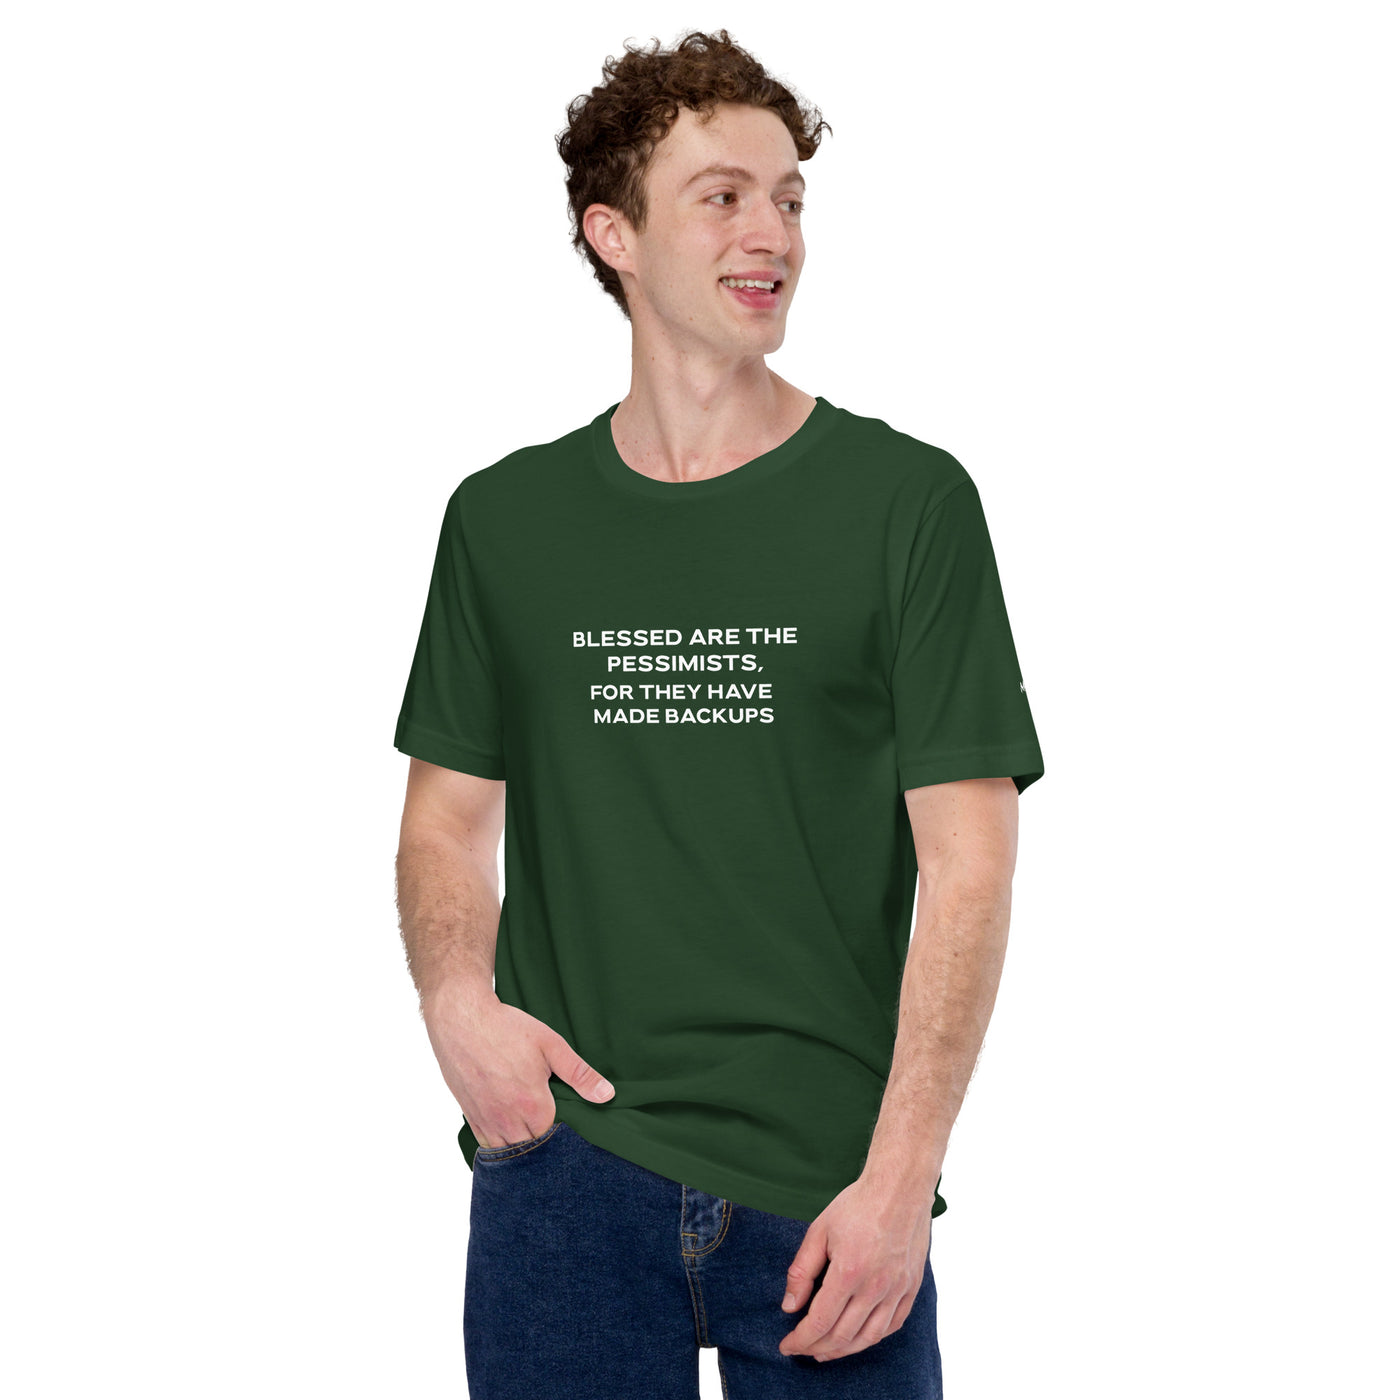 Blessed are the pessimists for they have made backups V2 - Unisex t-shirt